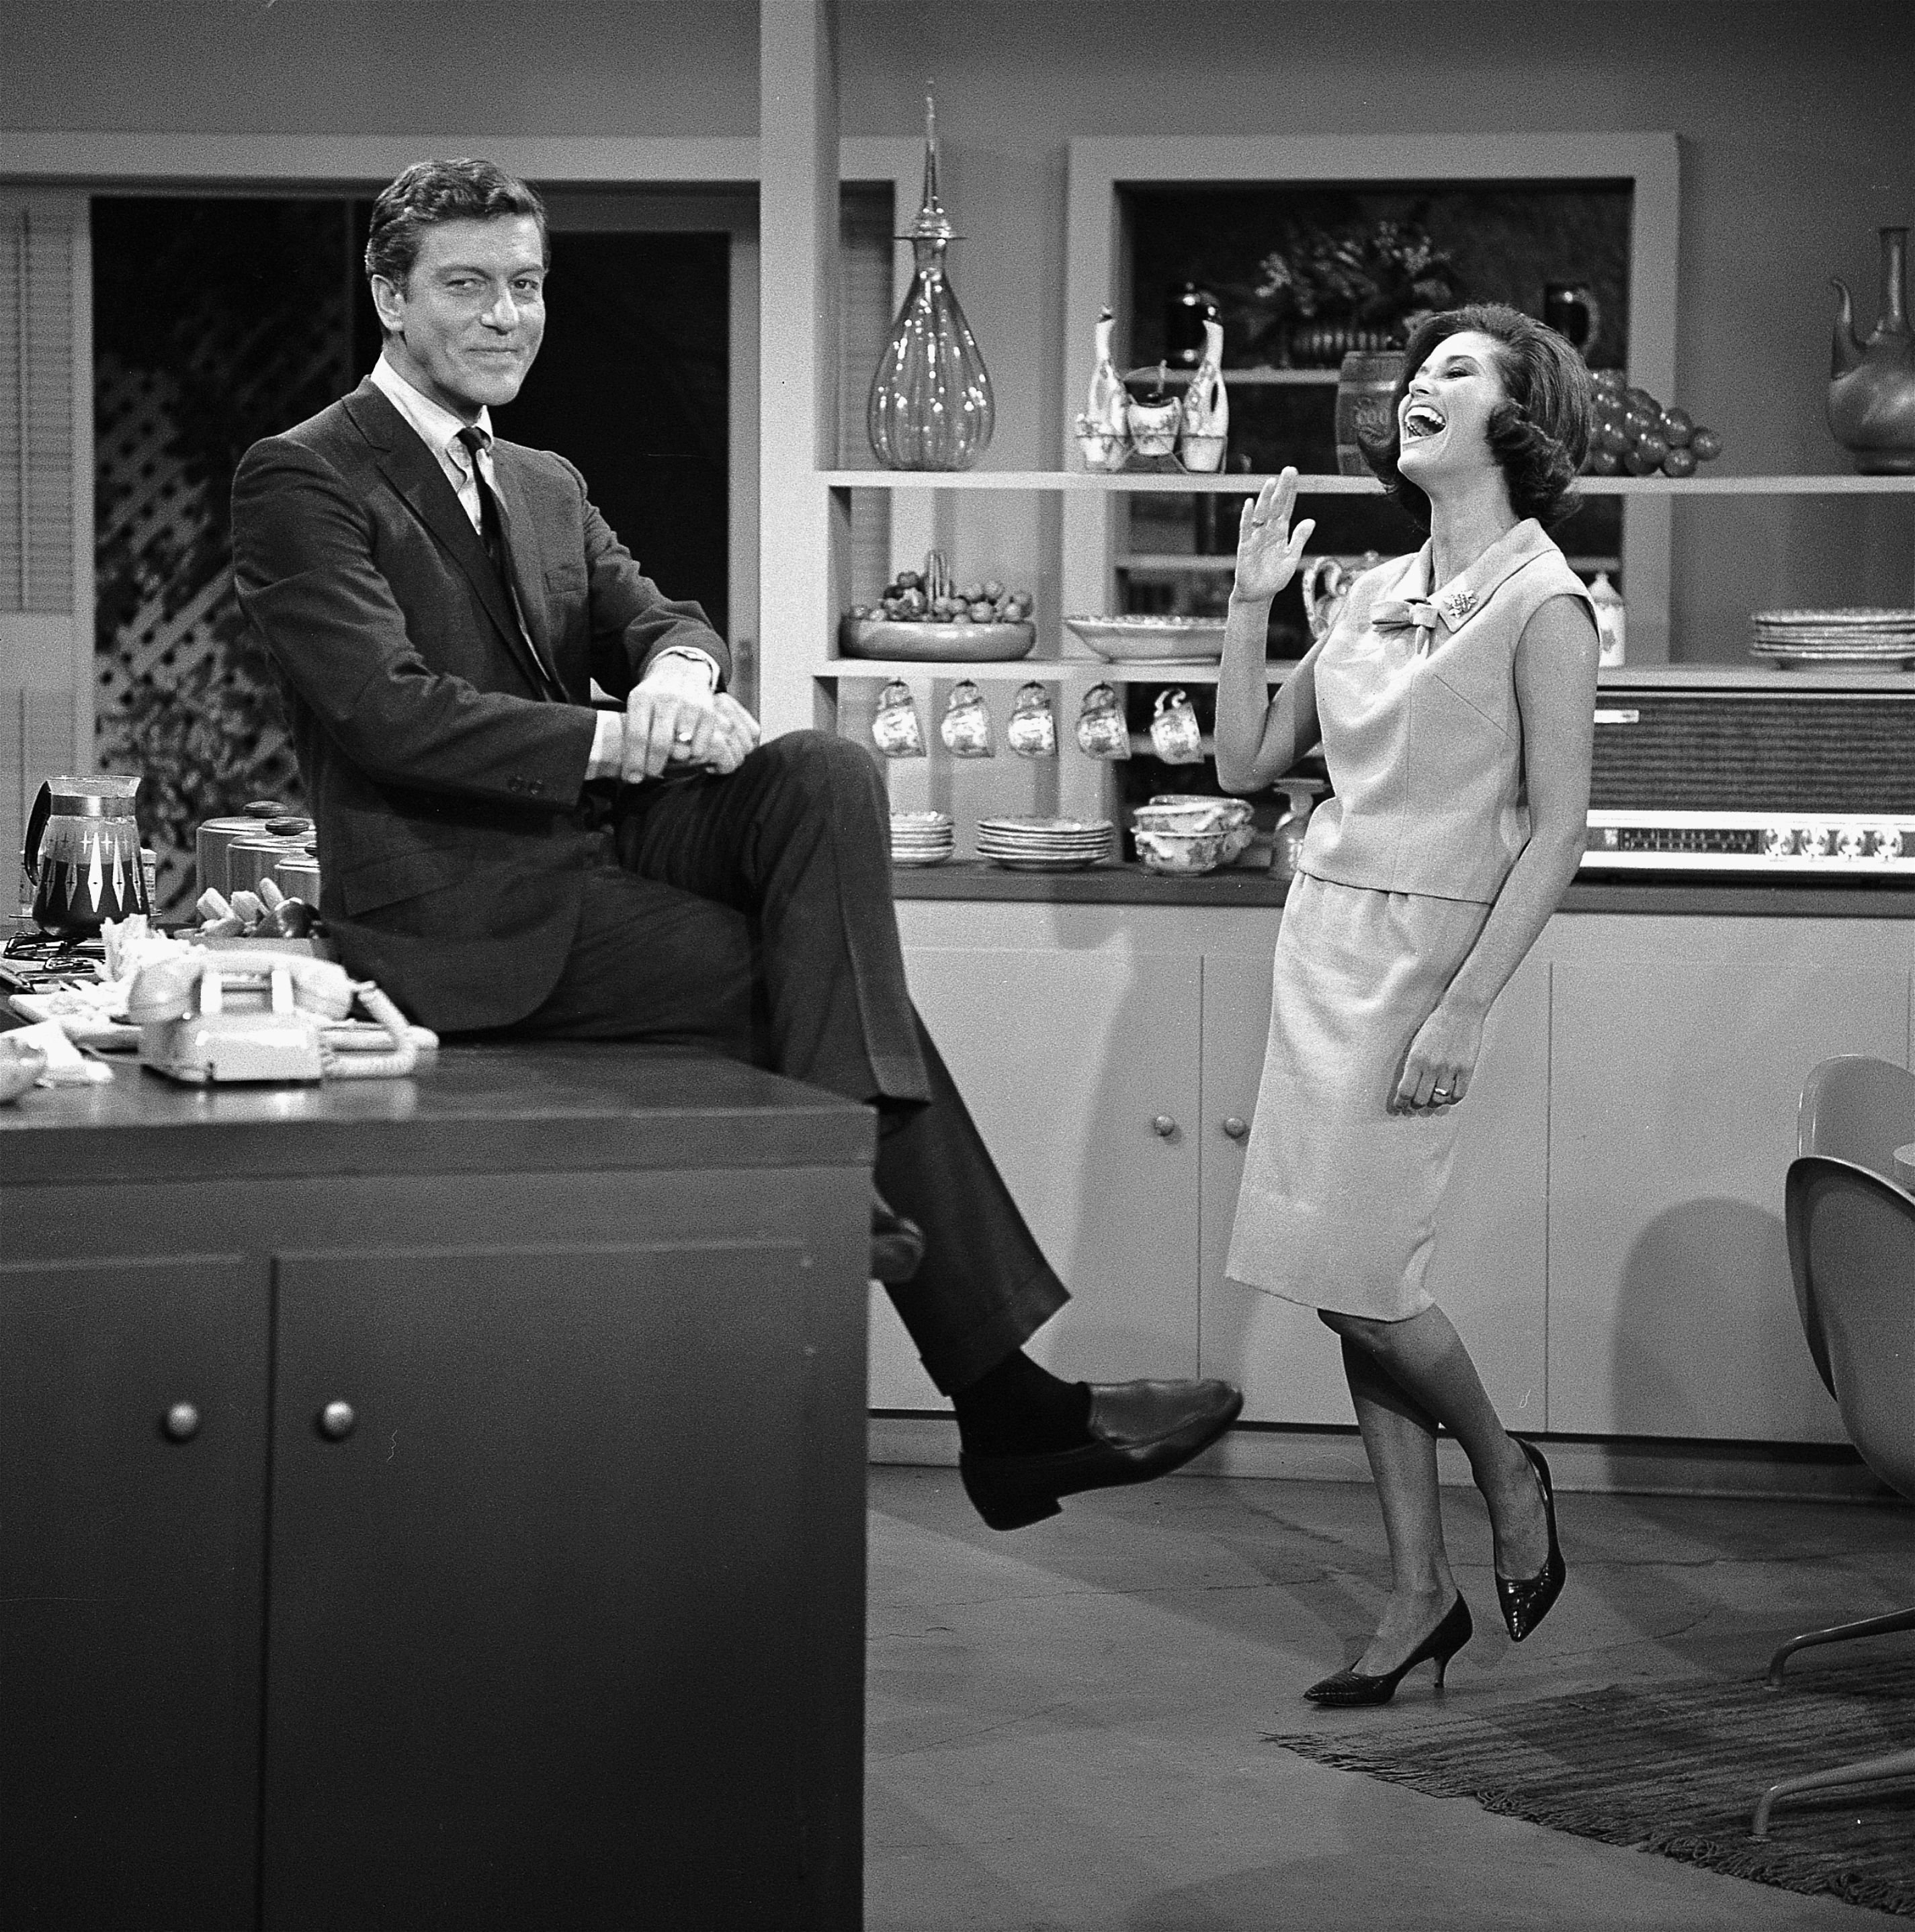 Dick Van Dyke and Mary Tyler Moore stand in their kitchen in 'The Dick Van Dyke Show'